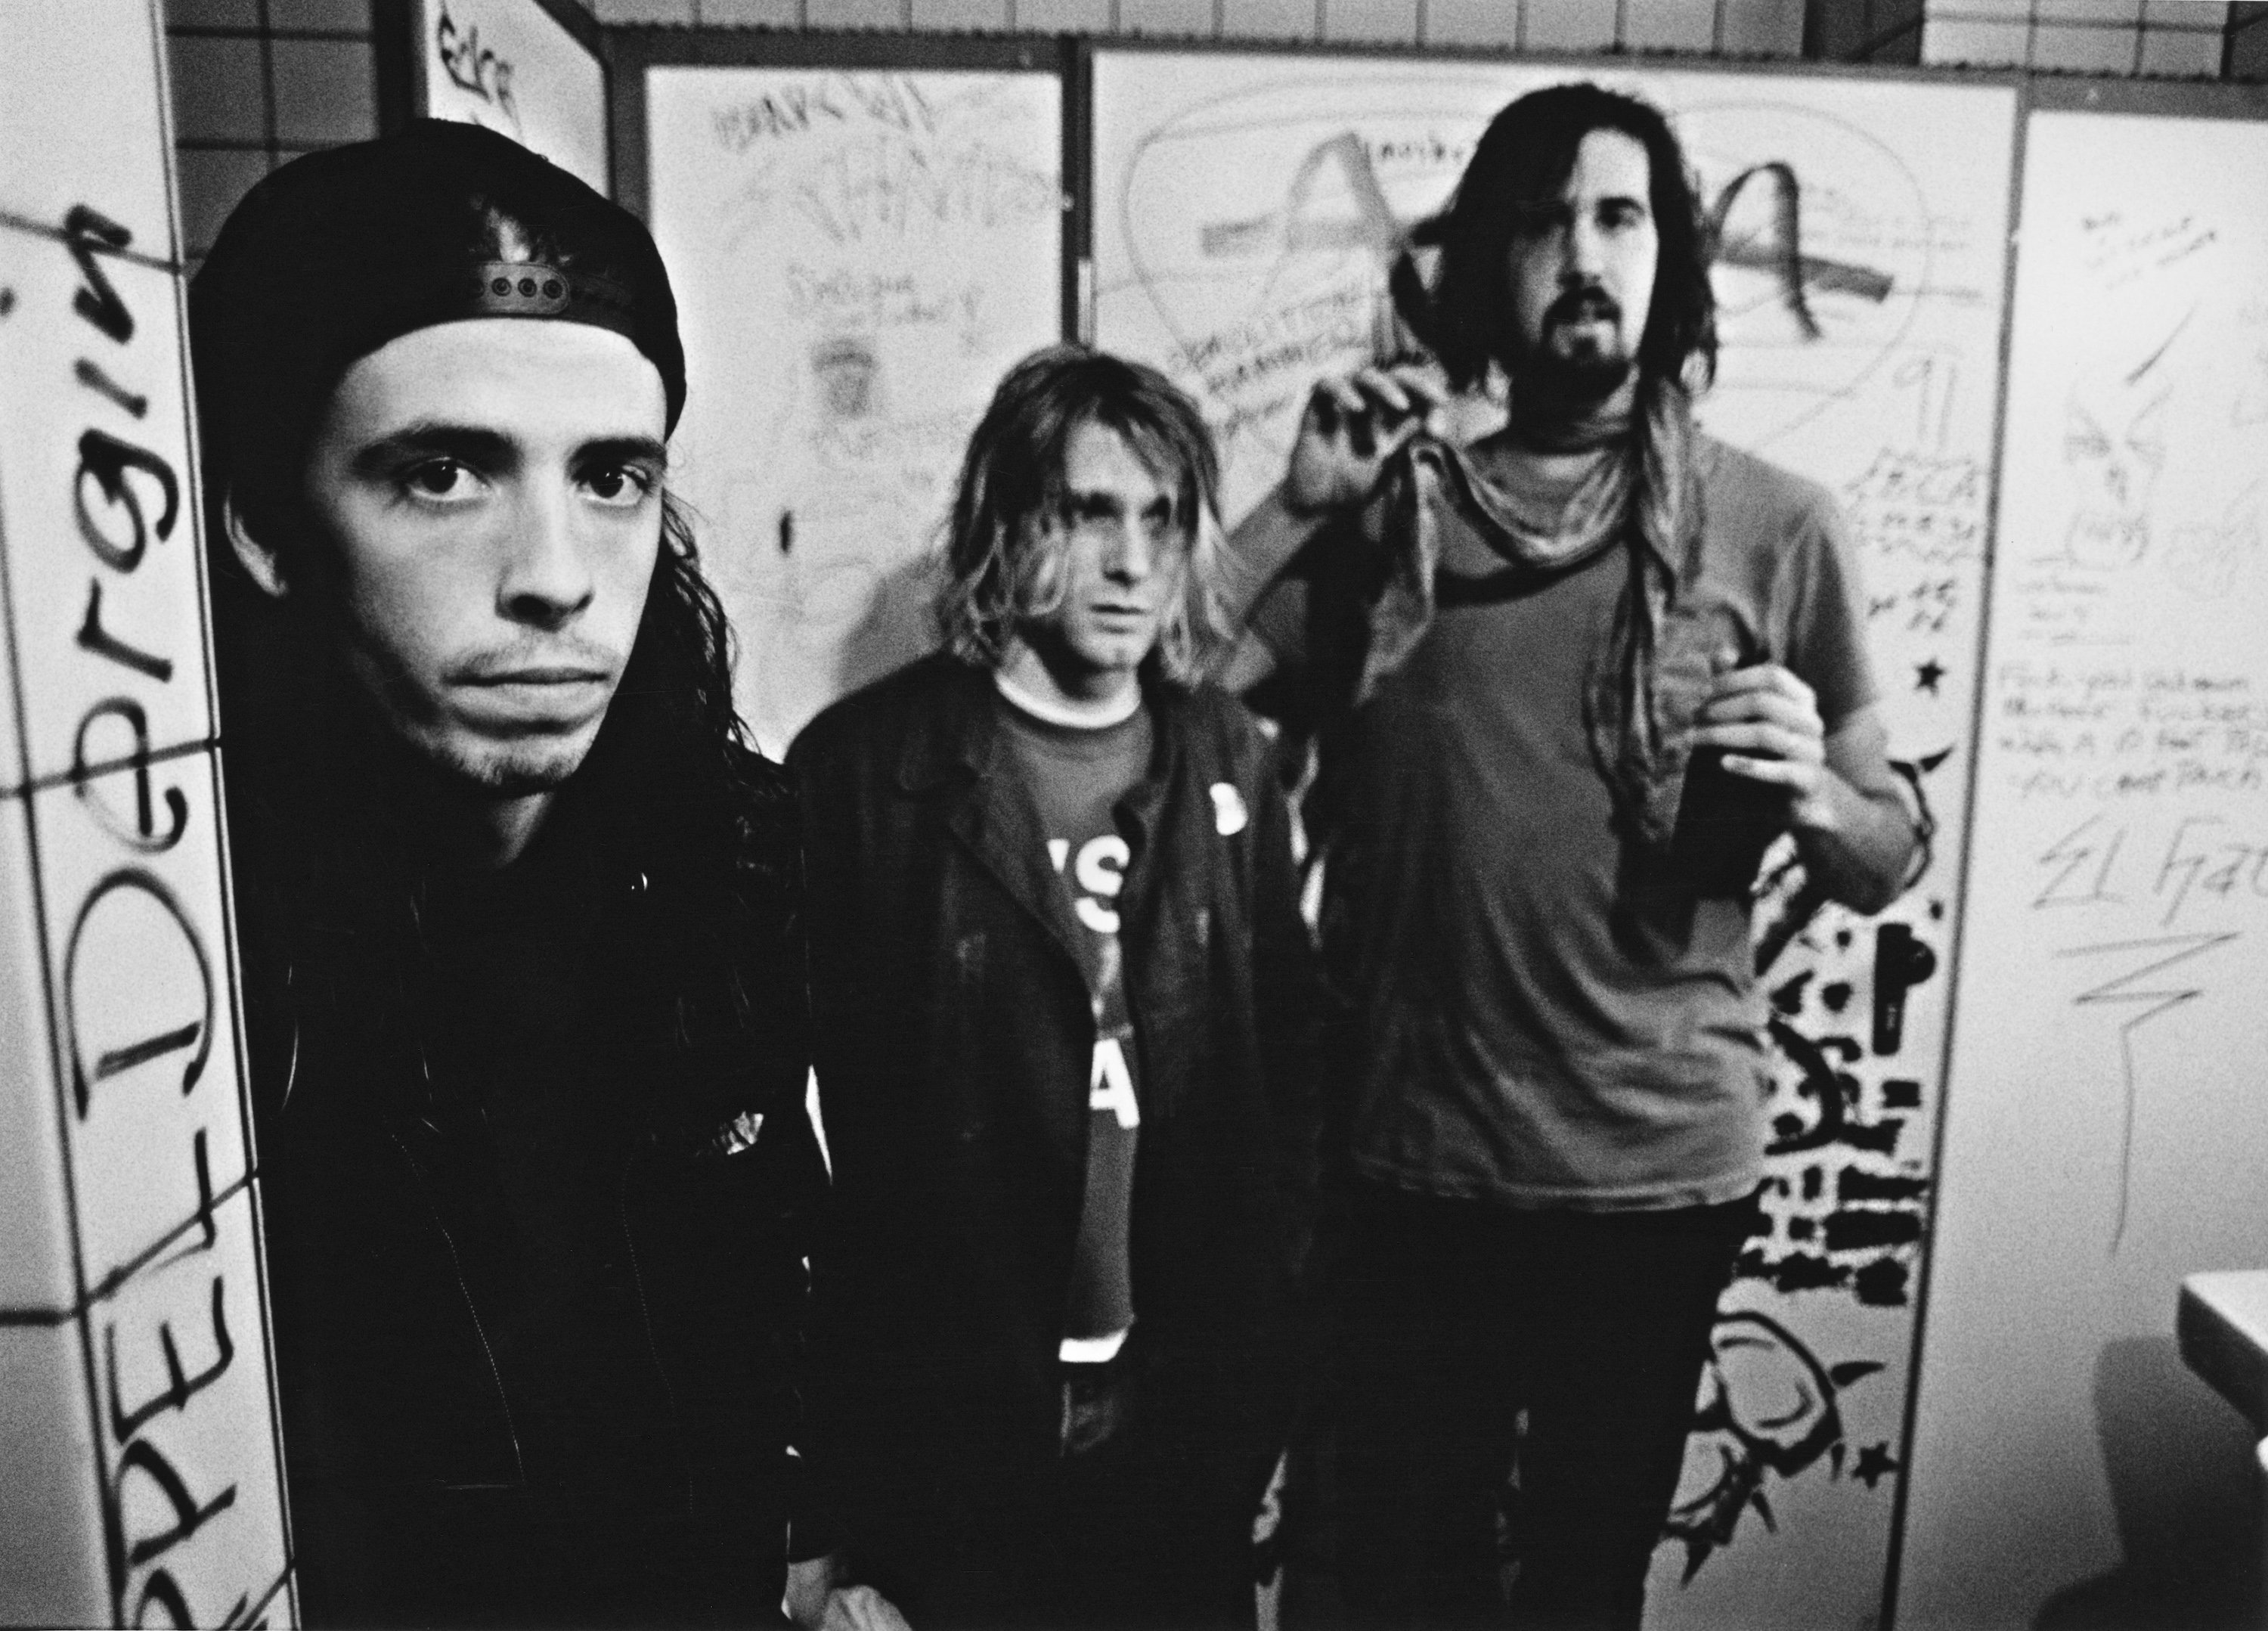 The band Nirvana posing for photo